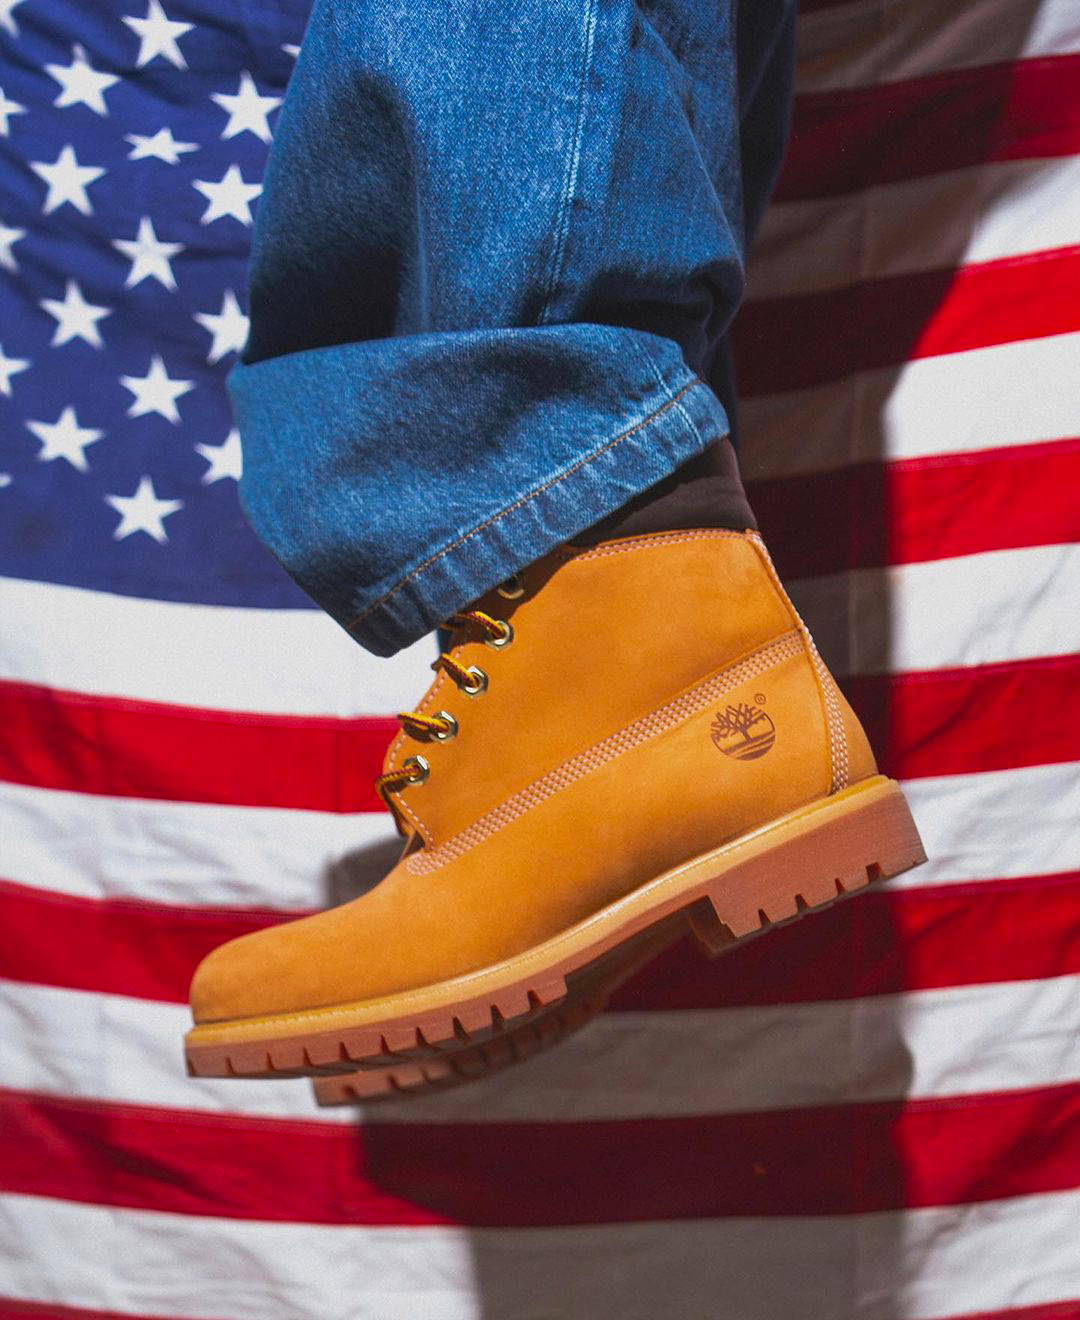 One Block Down celebrates the 50th Anniversary of the Original Timberland Boot with @kiddarthh